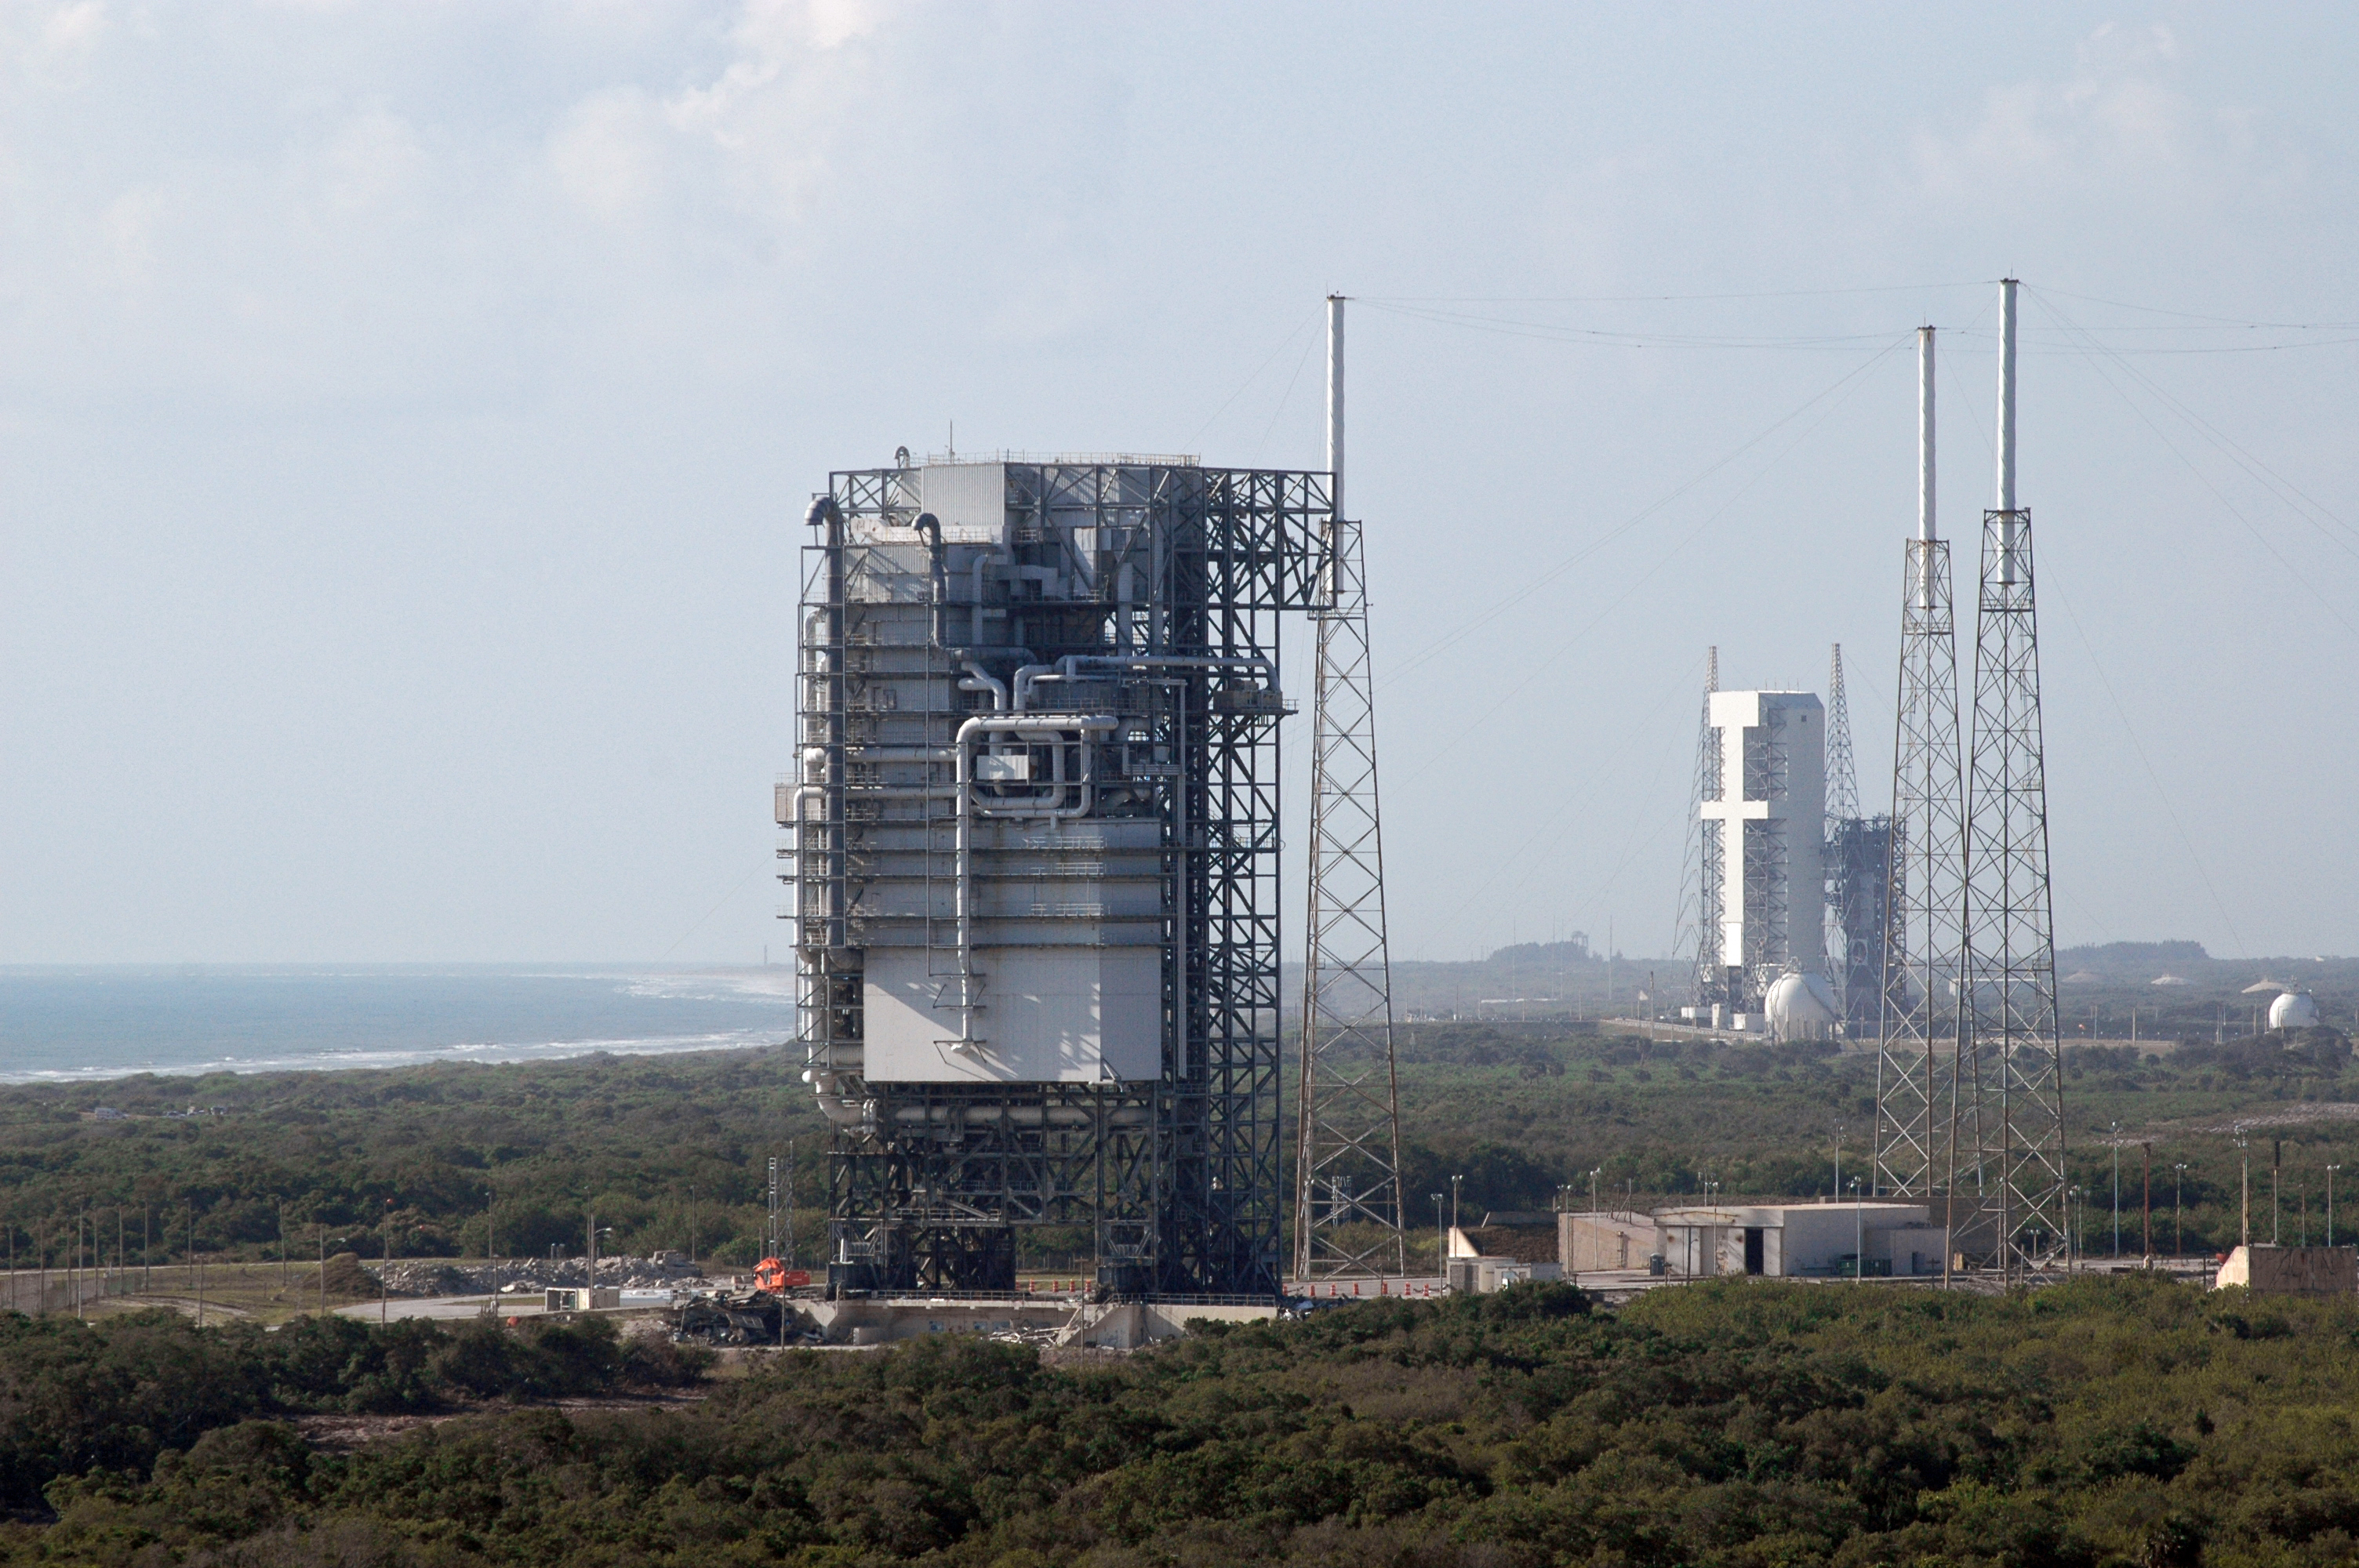 Space Launch Complex 40 with Titan rocket mobile service tower